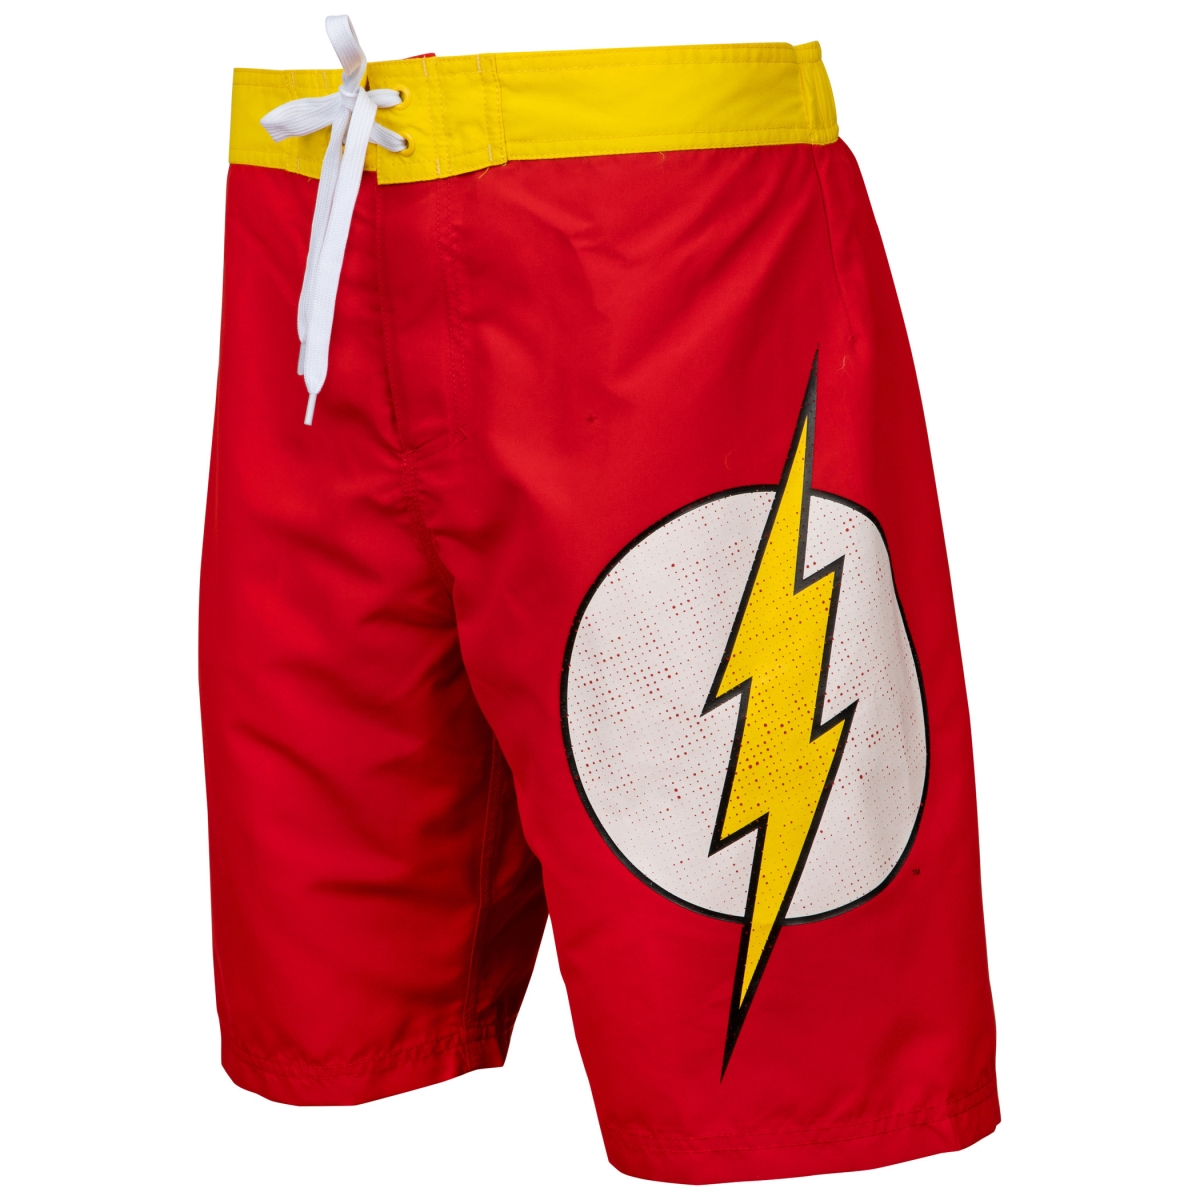 Picture of Flash 803503-small 28-30 Flash Symbol Board Shorts, Heather Red - Small 28-30